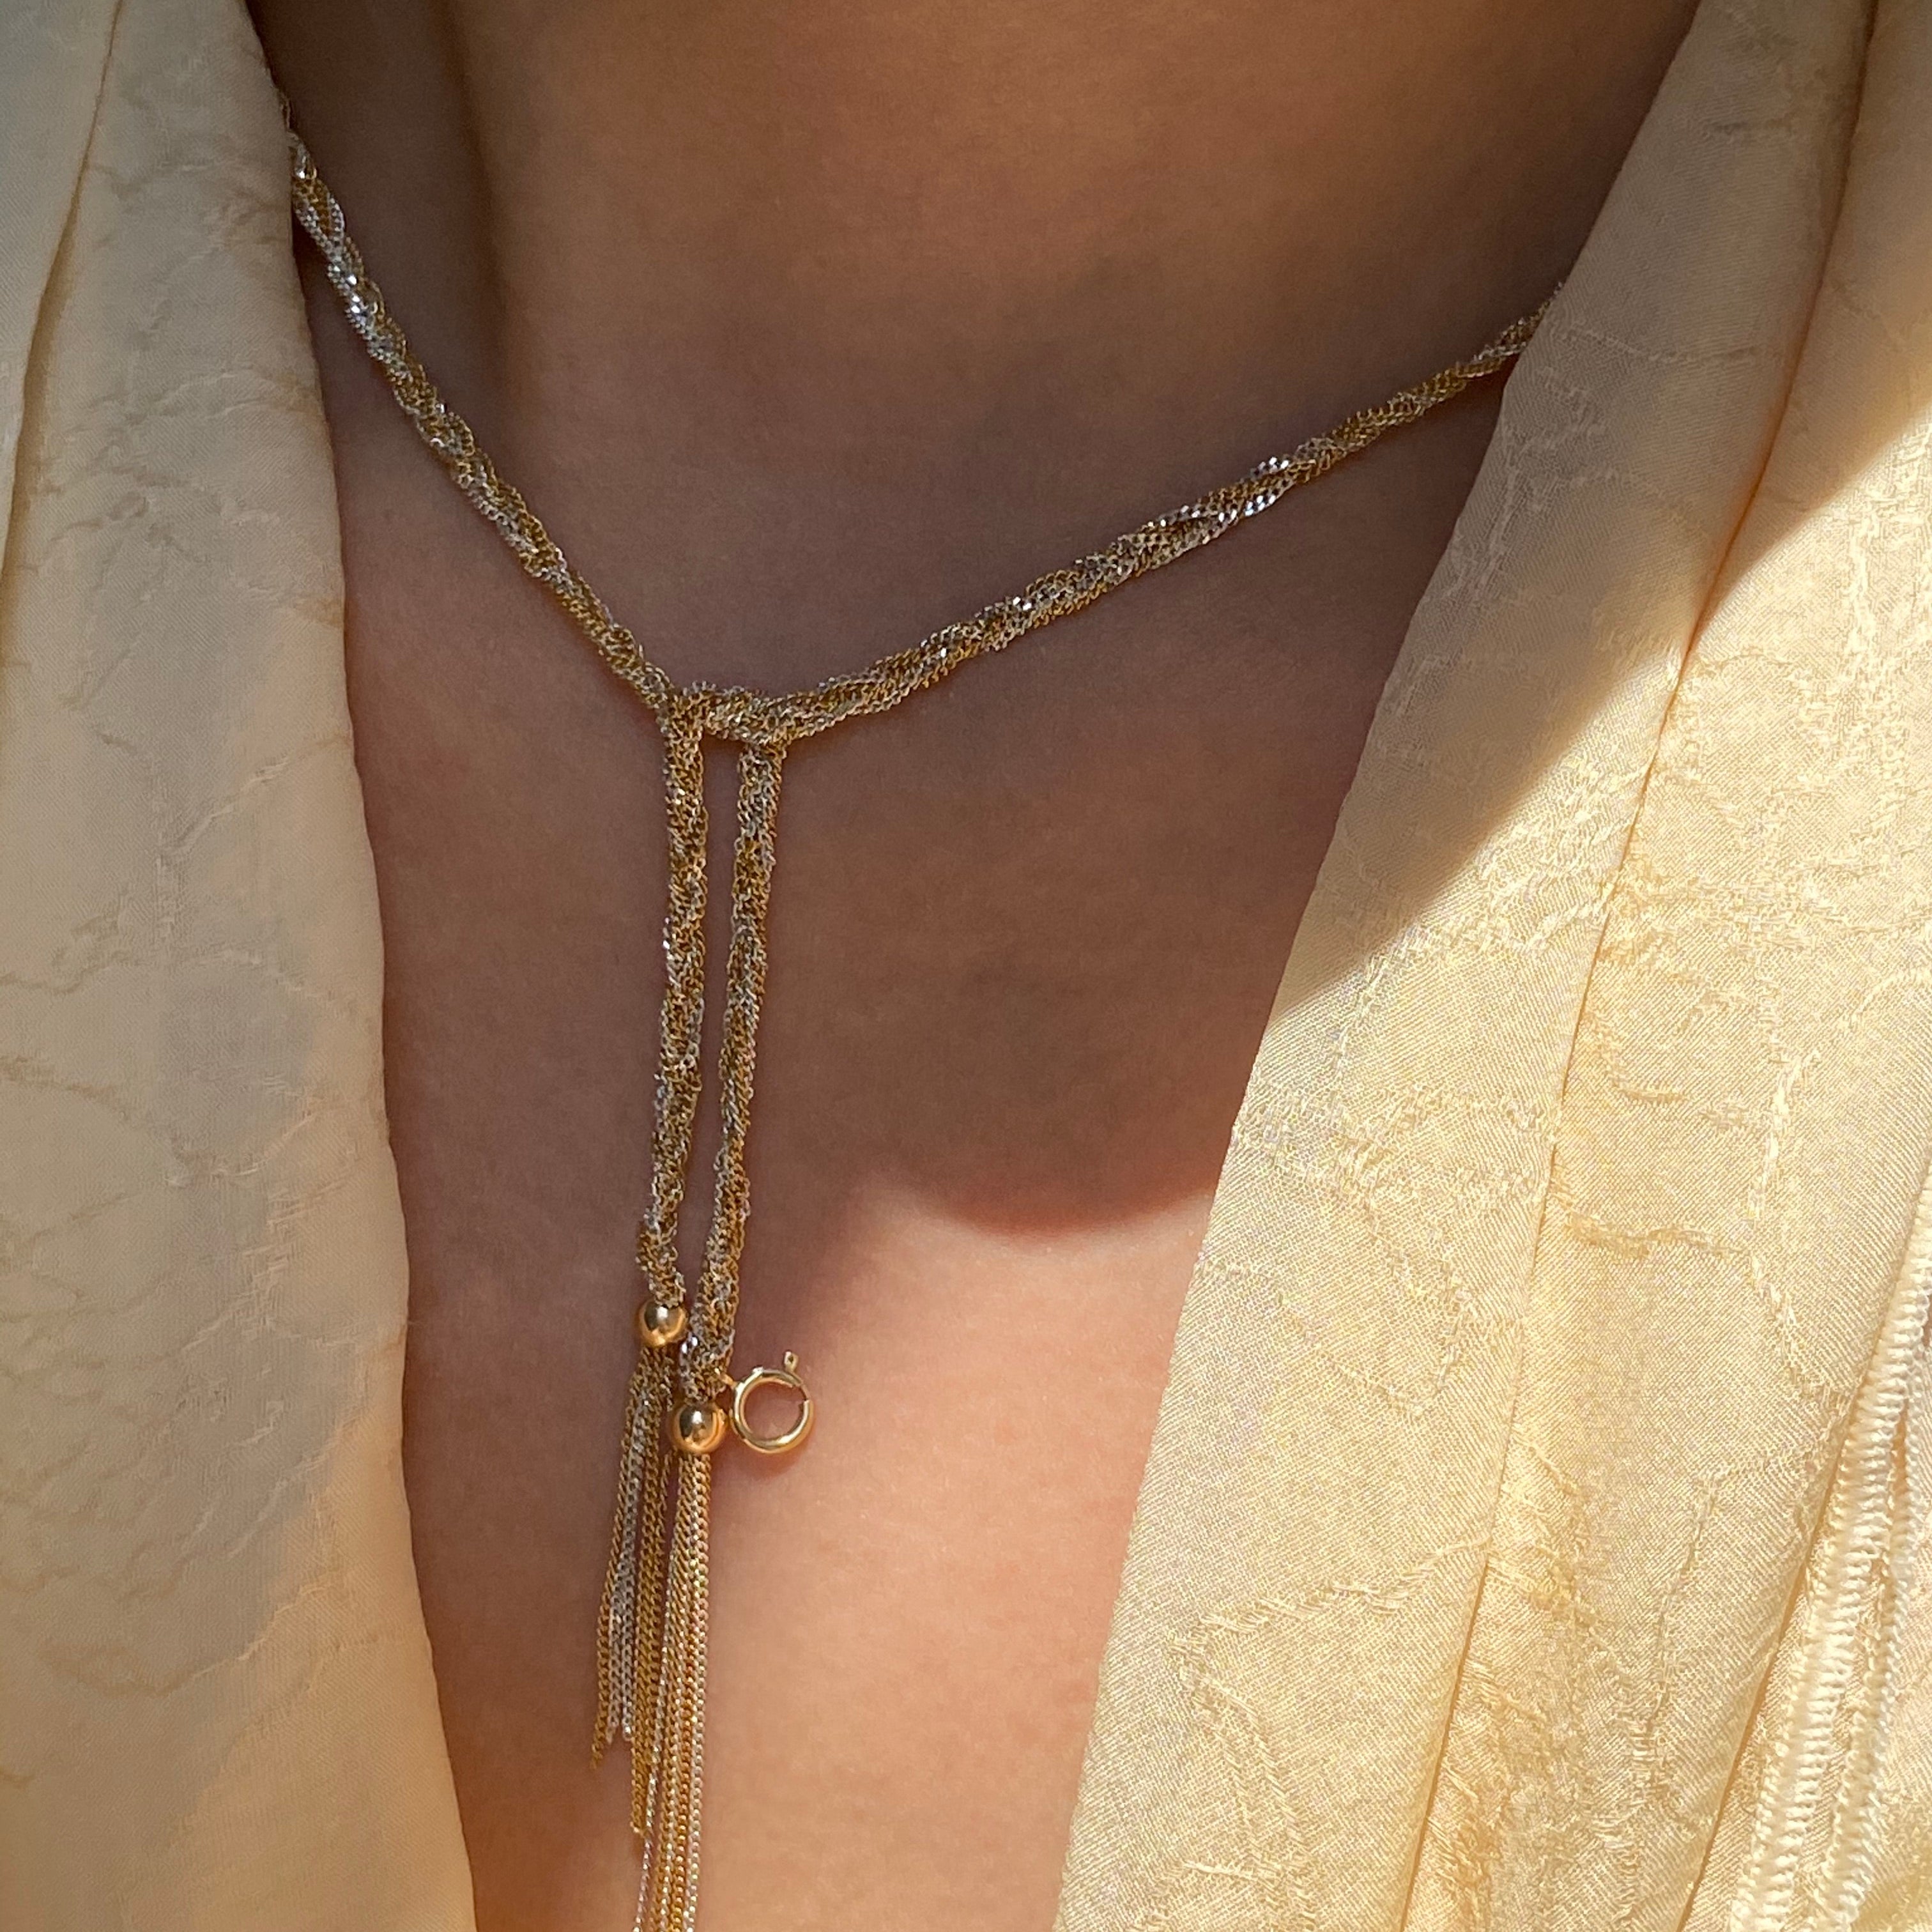 Hand-Woven 14k Gold And Silver Tassel Necklace